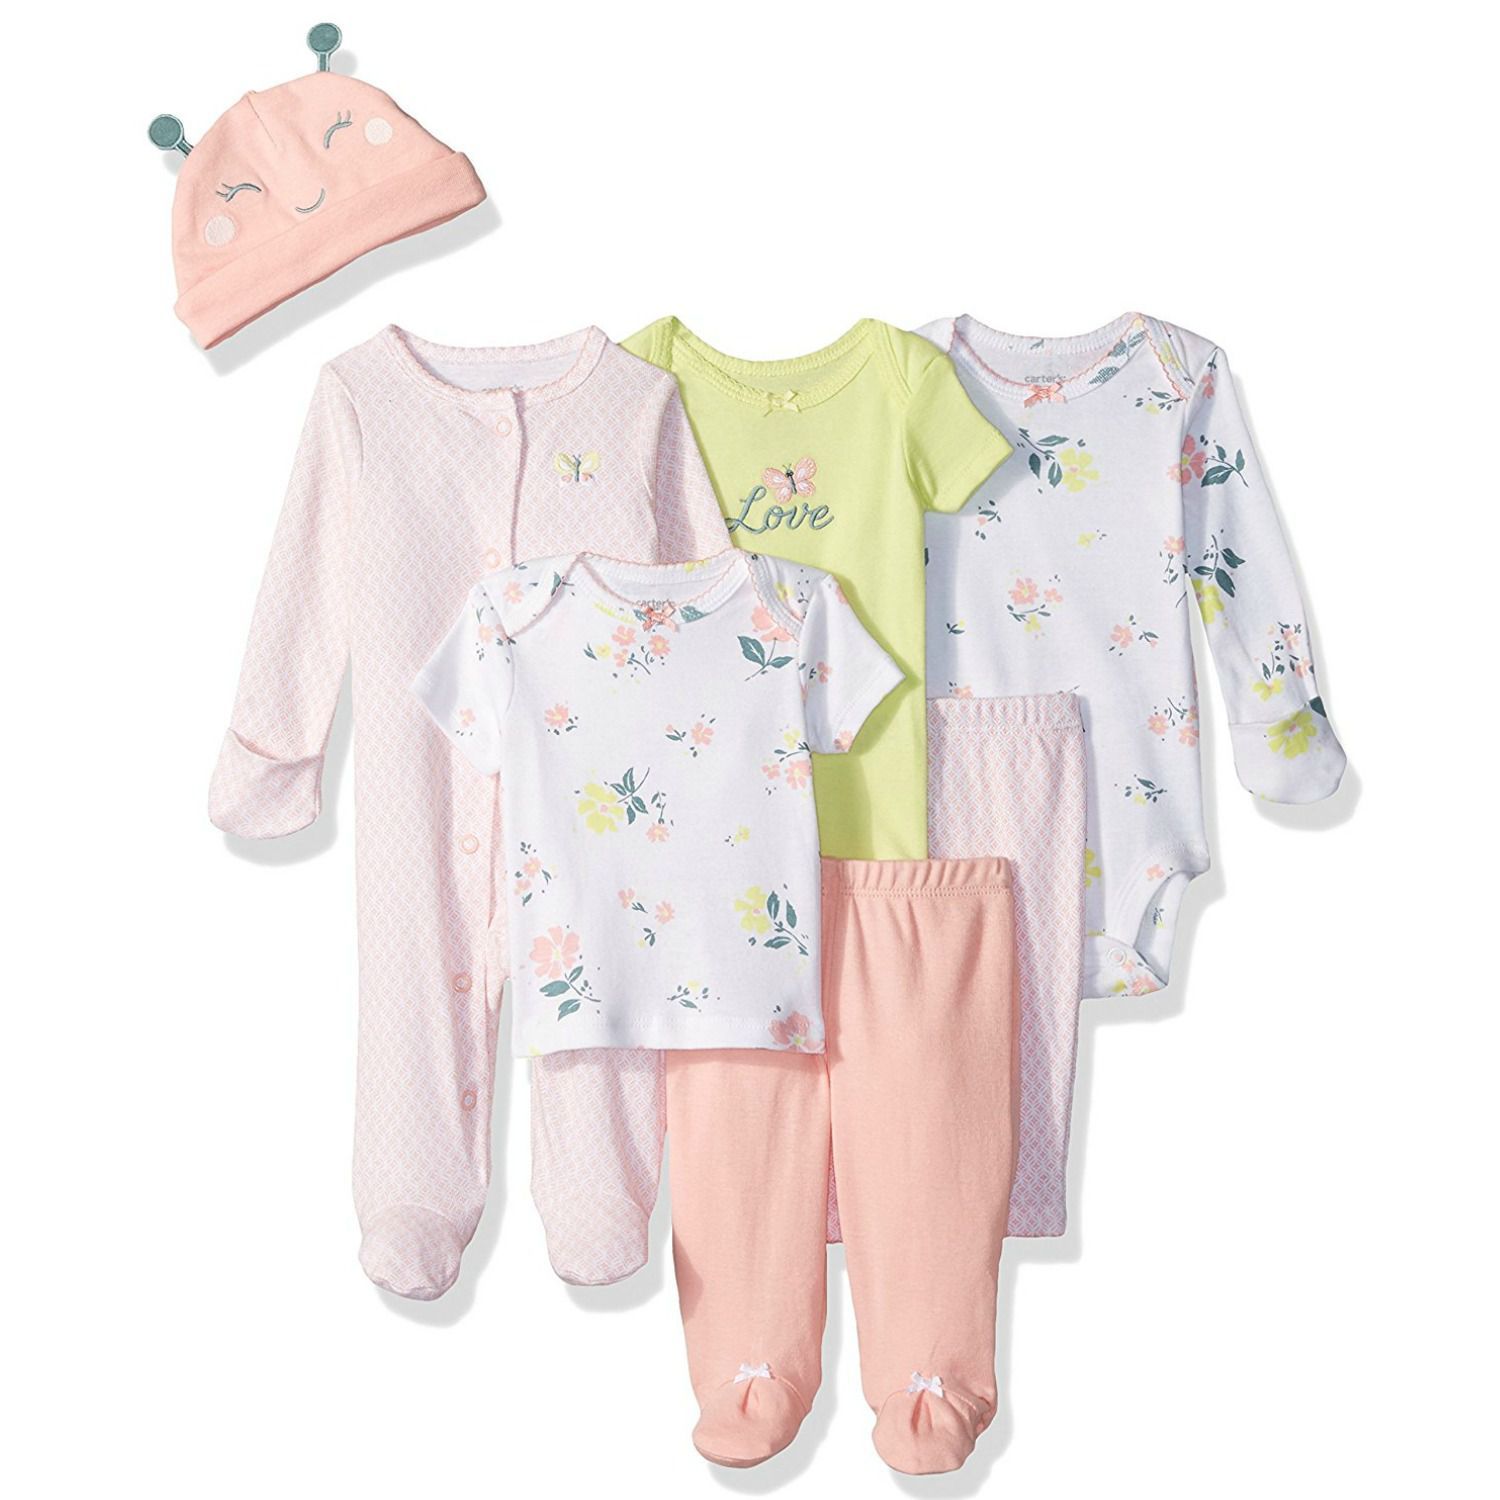 Baby layette